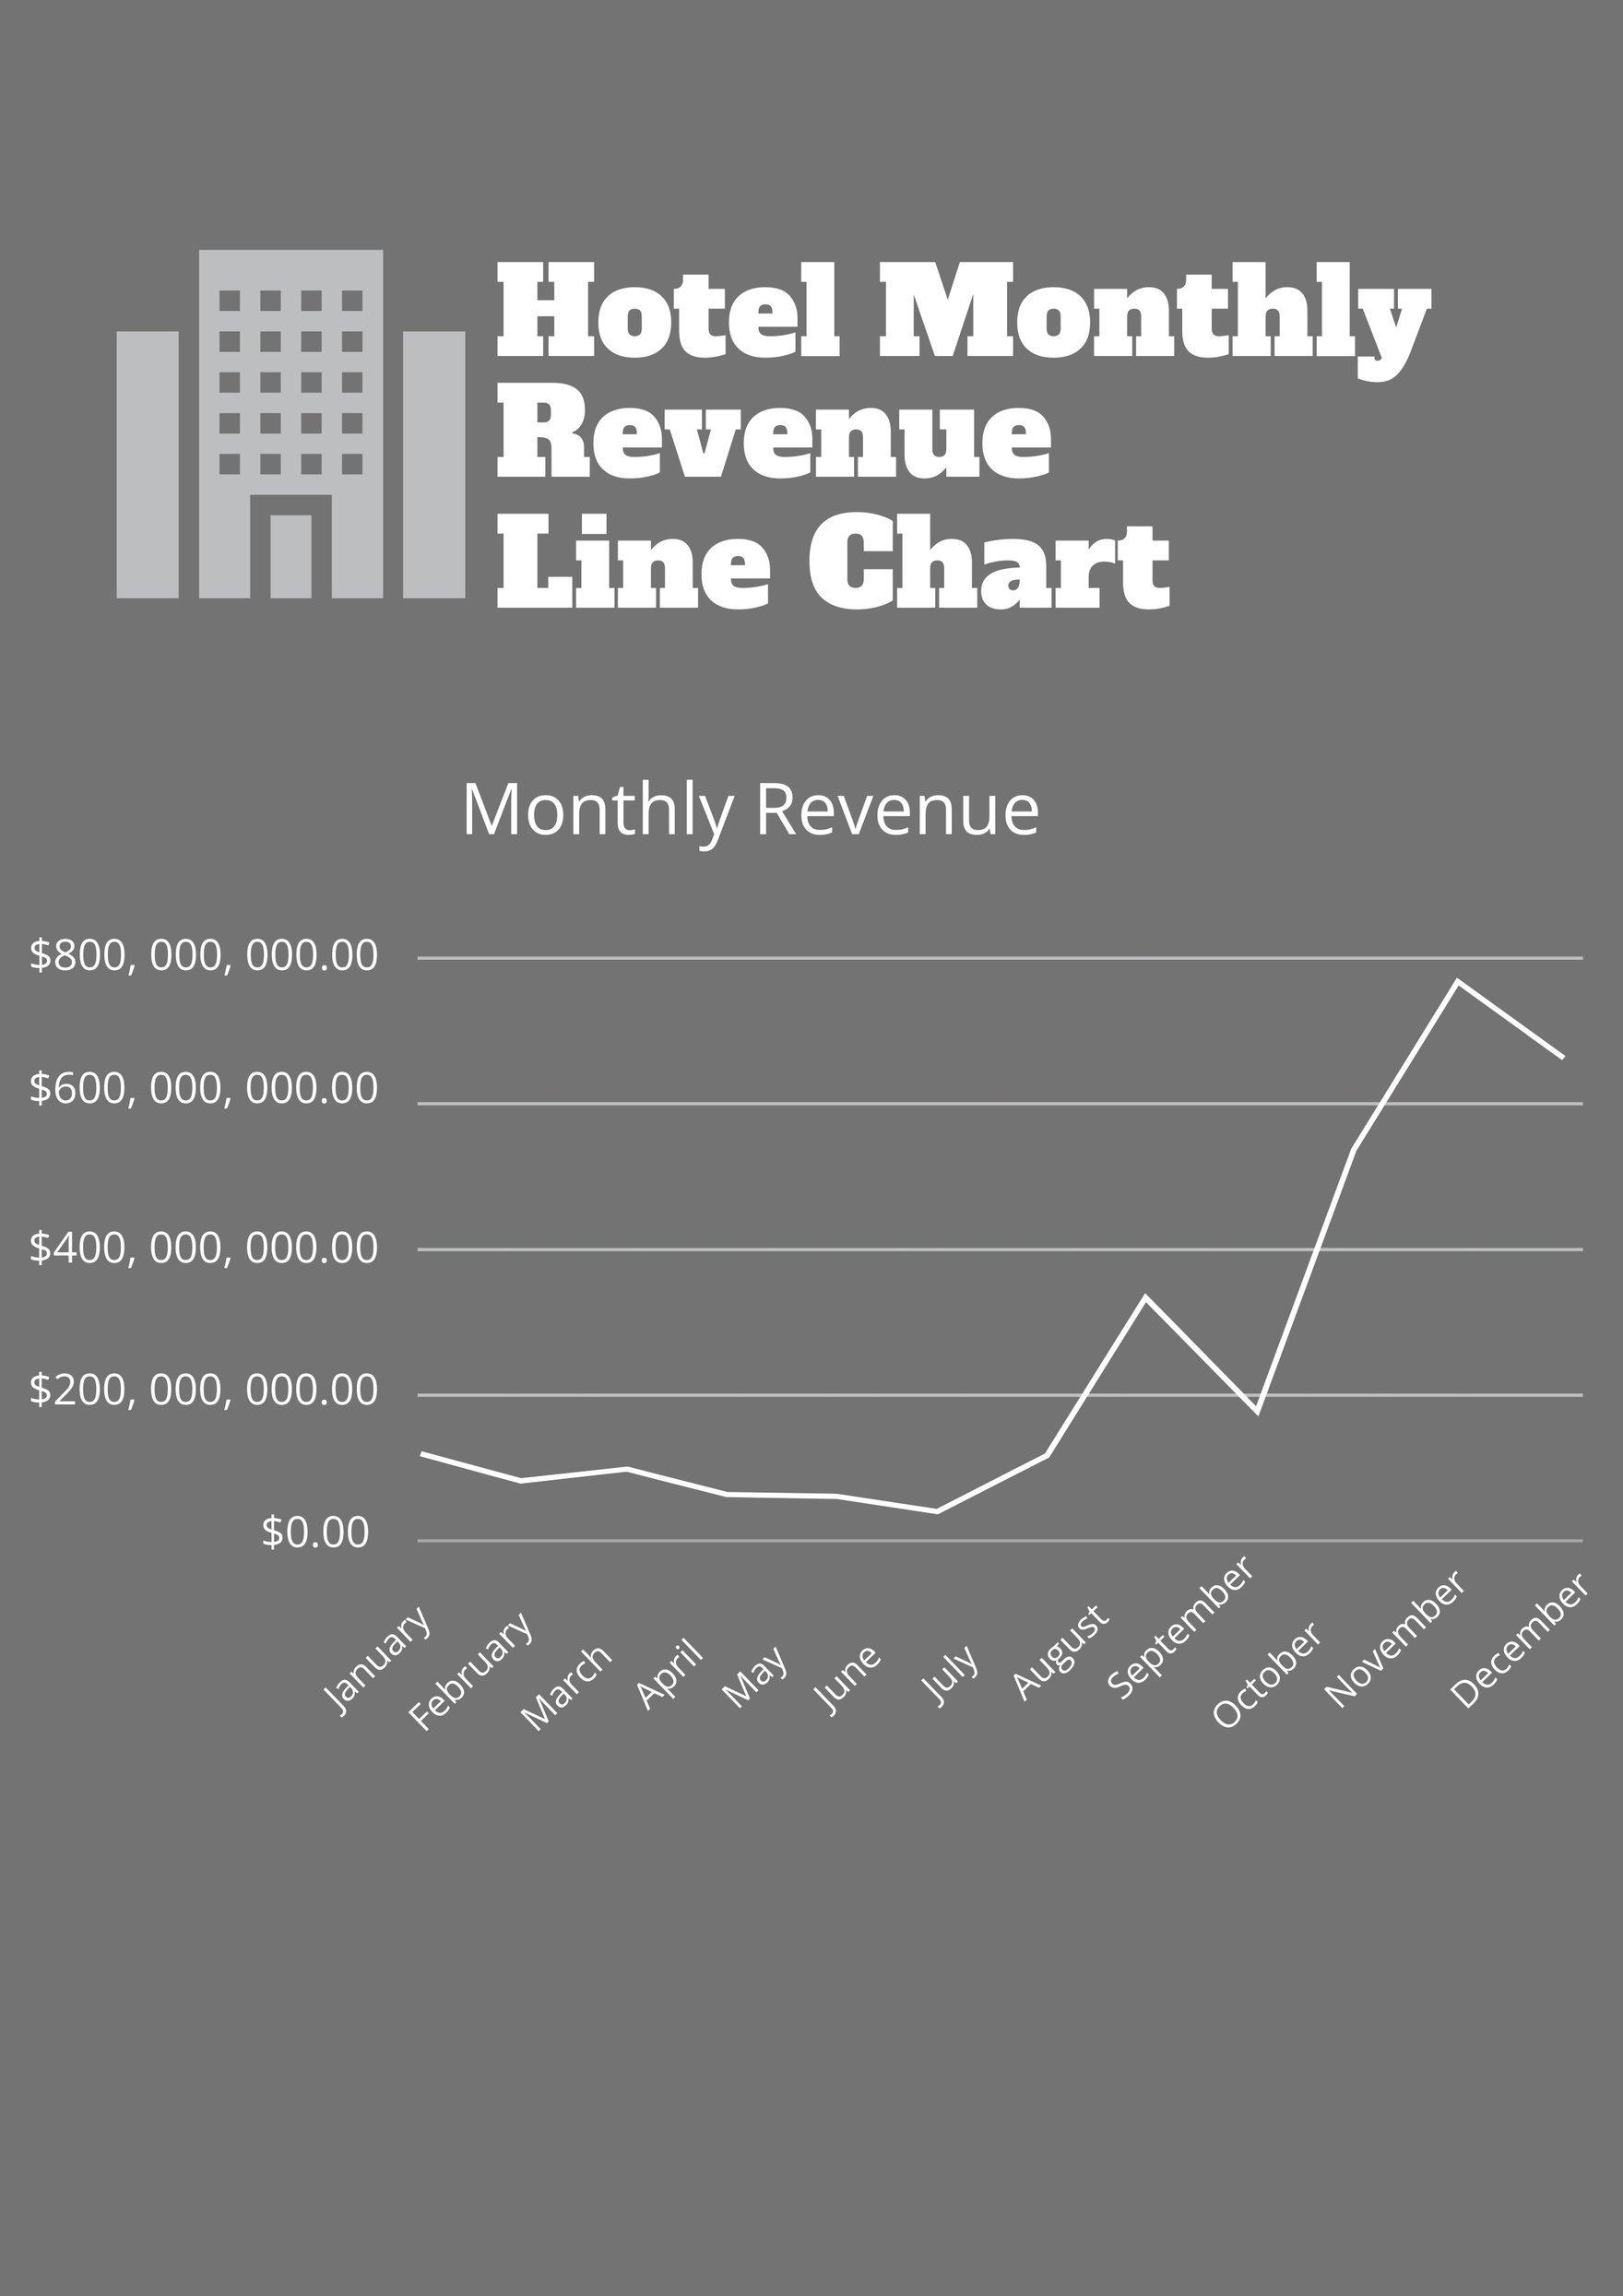 Hotel Monthly Revenue Line Chart